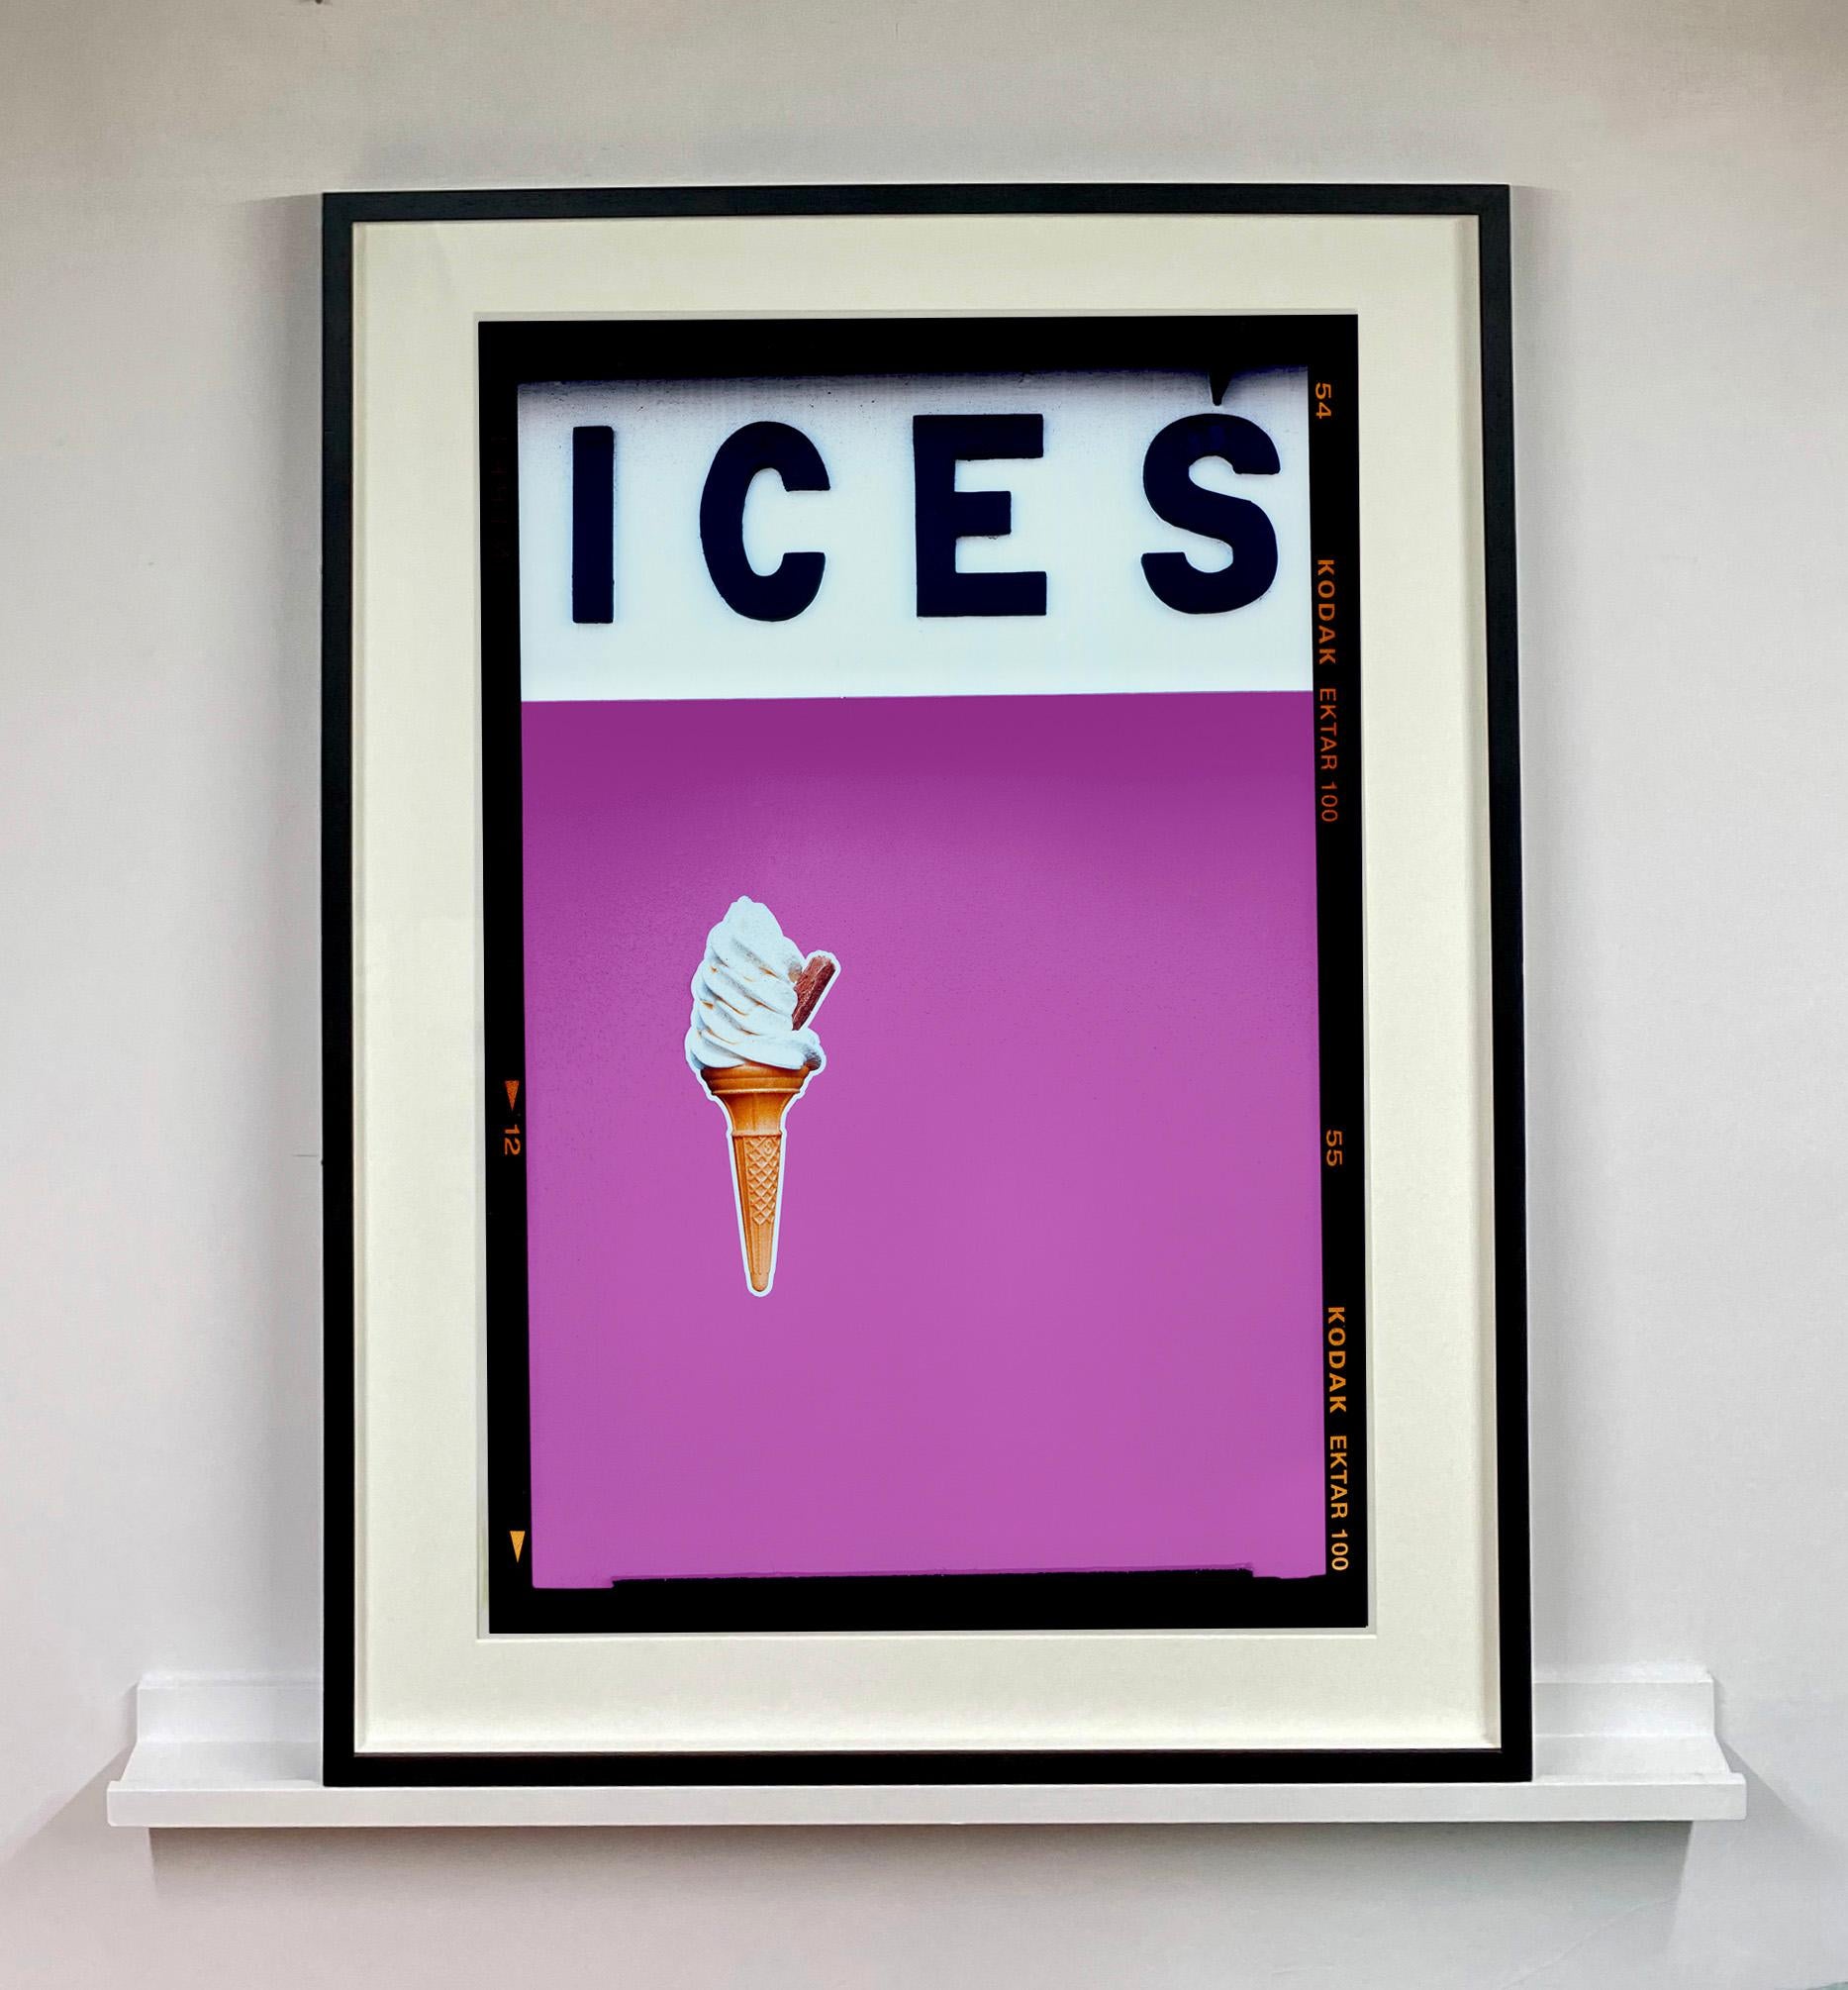 ICES (Plum), Bexhill-on-Sea - British seaside color photography - Contemporary Photograph by Richard Heeps